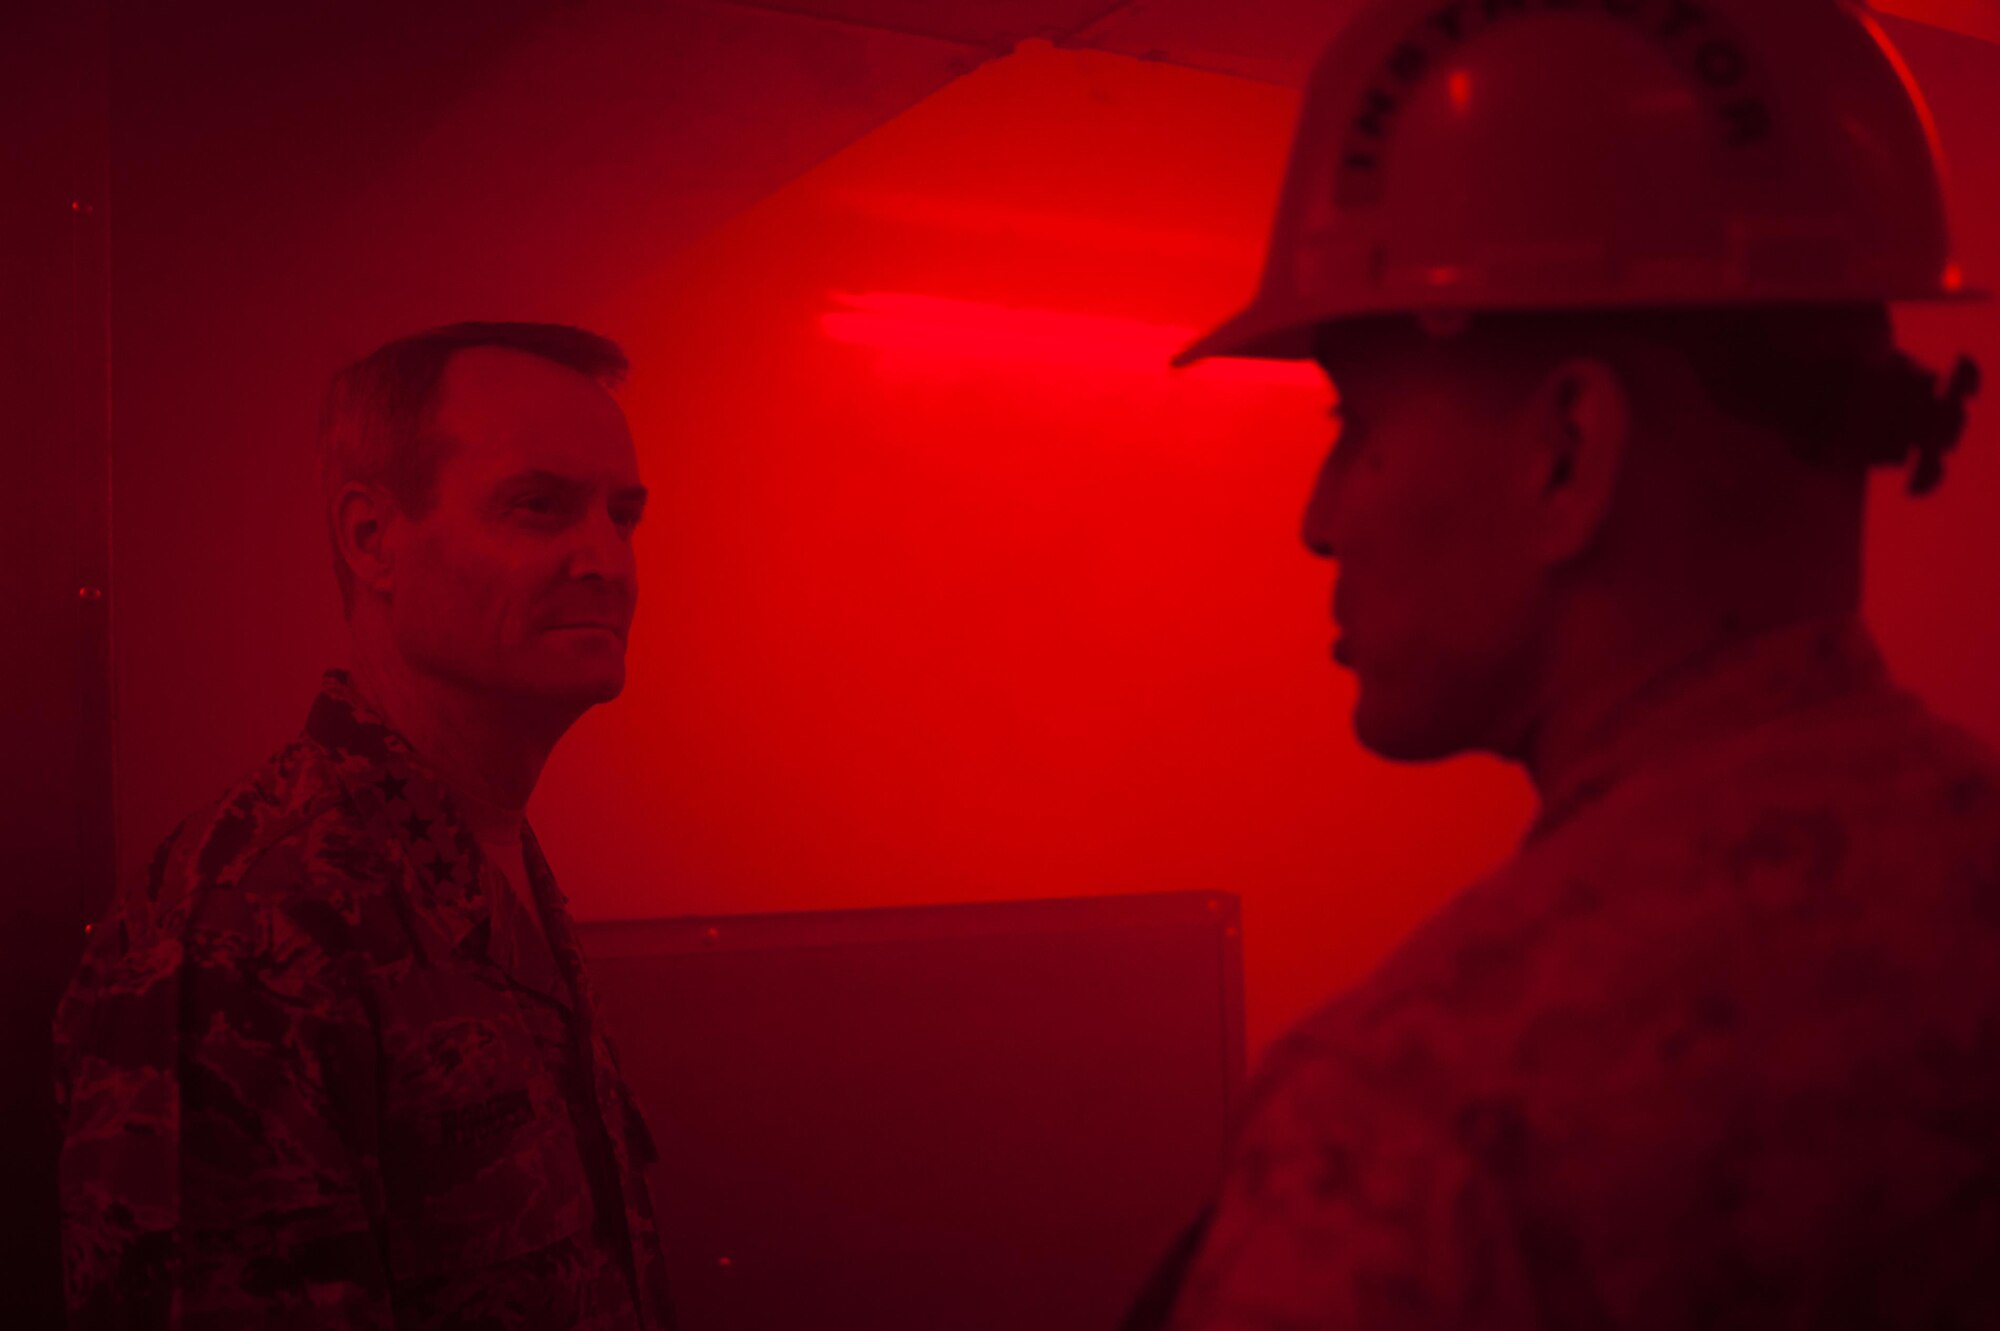 U.S. Air Force Lt. Gen. Darryl L. Roberson, commander of Air Education and Training Command, walks through the search and rescue trainer room during the tour of the Department of Defense Louis F. Garland Fire Academy at Goodfellow Air Force Base, Texas, March 18, 2016. The building uses noise and smoke to overstimulate the firefighters’ senses in the search and rescue trainer room.  (U.S. Air Force photo by Senior Airman Scott Jackson/Released)